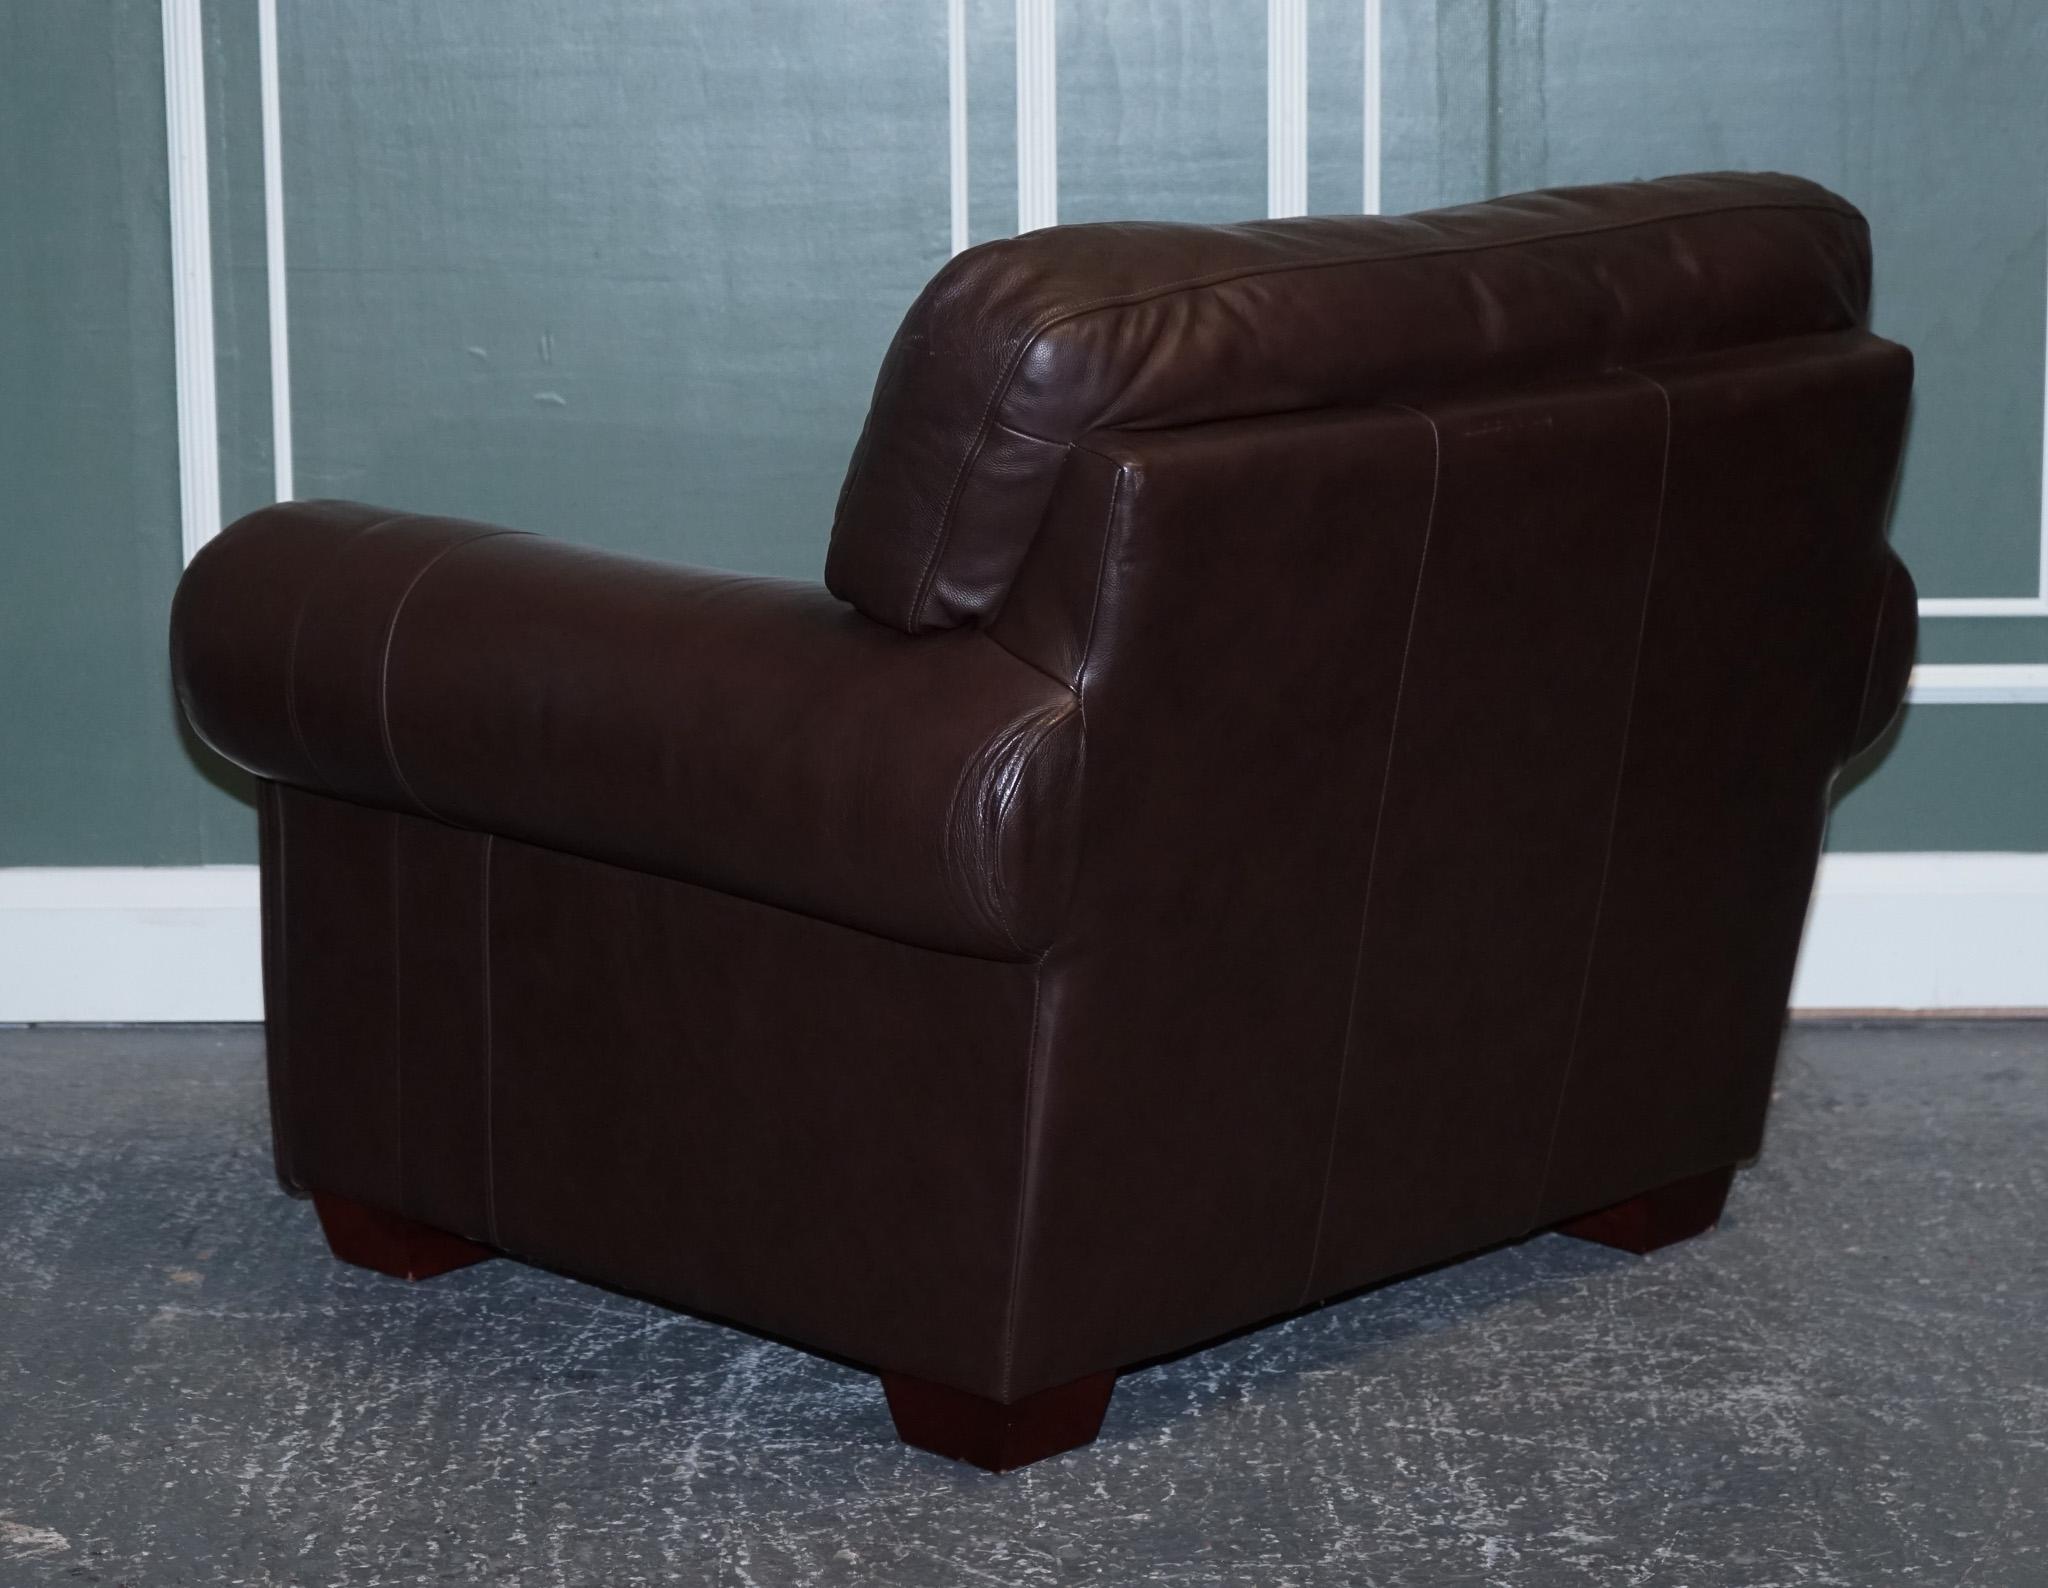 PAIR OF LARGE COMFORTABLE BROWN LEATHER ARMCHAIRS, MATCHiNG SOFA AVAILABLE For Sale 9